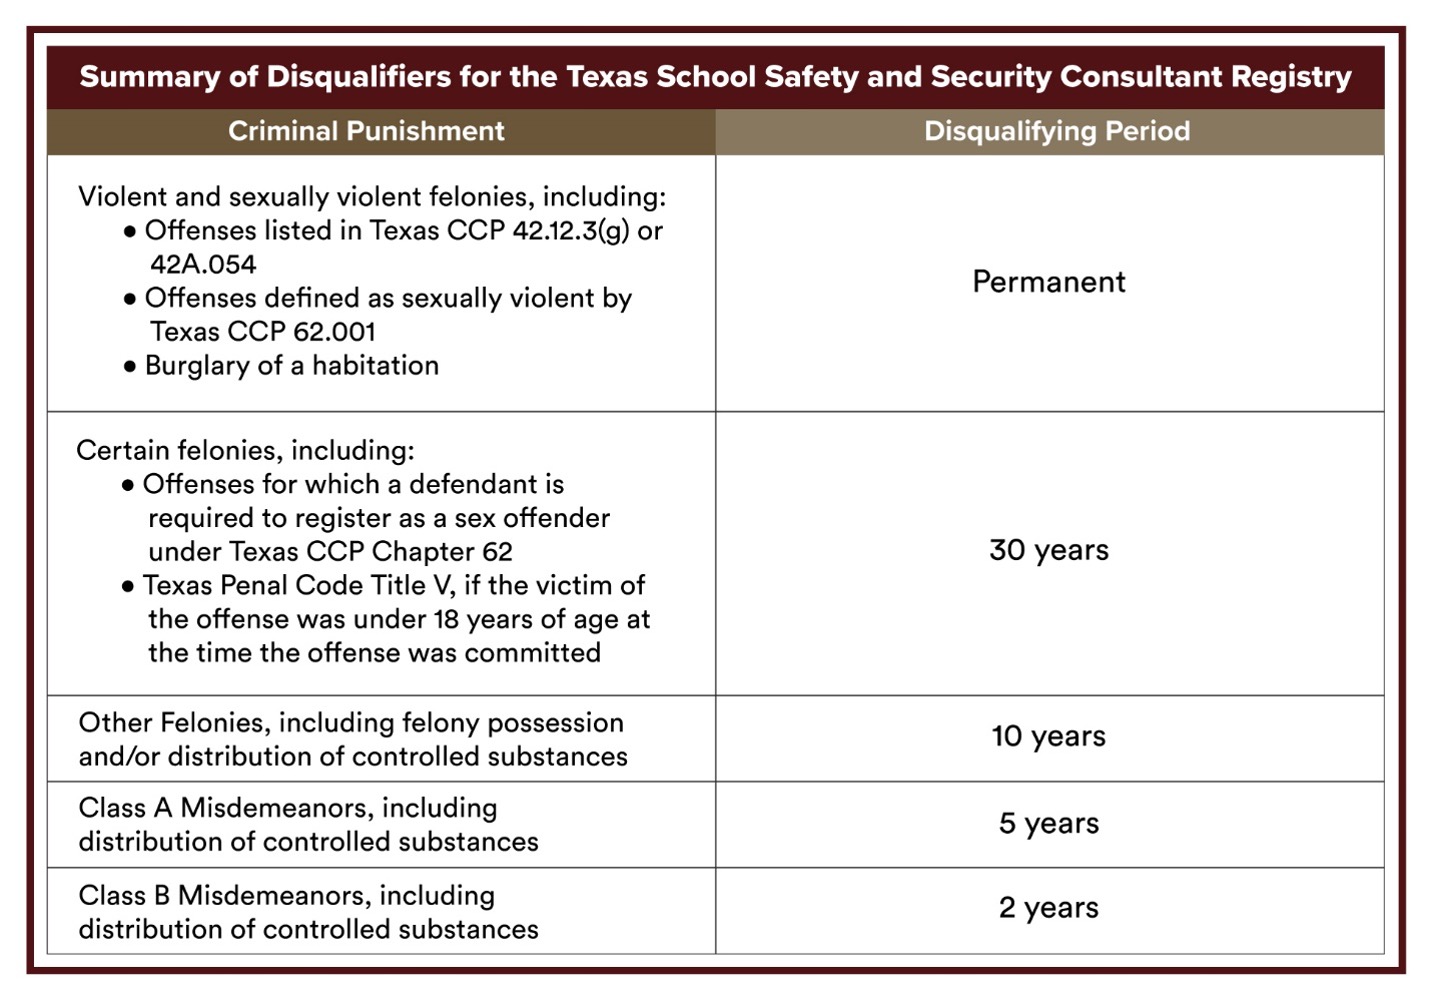 Texas School Safety and Security Consultant Registry